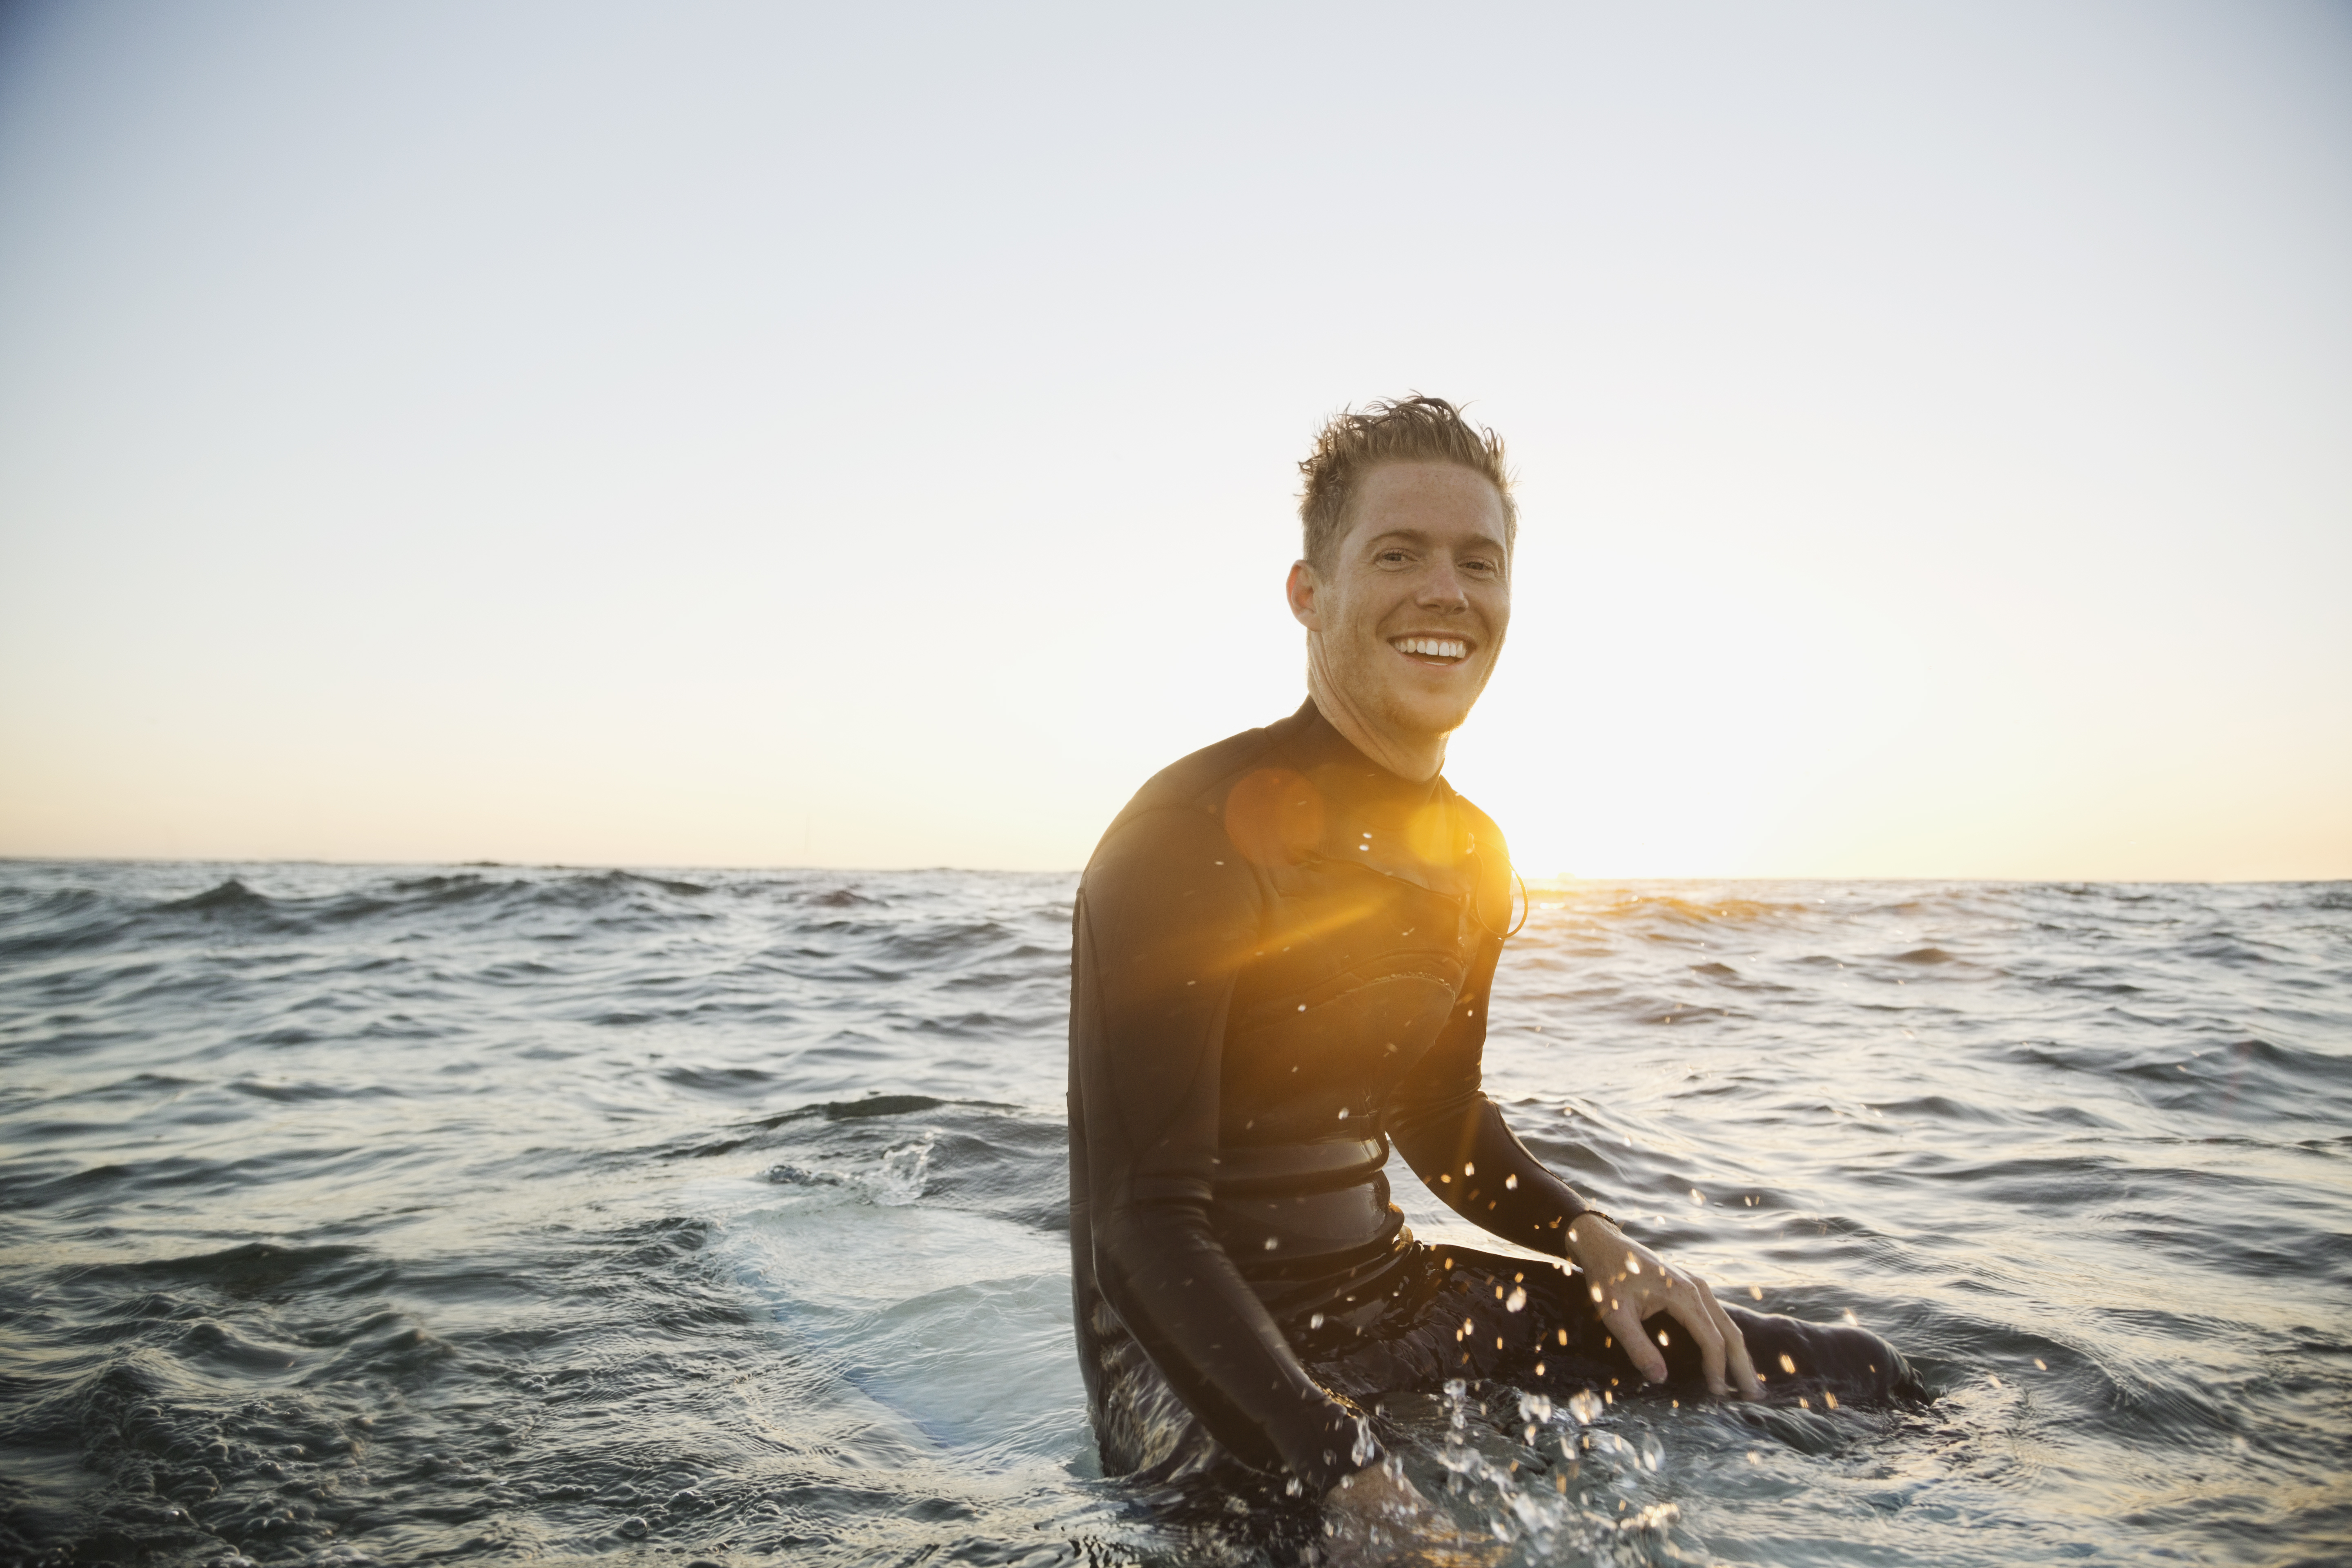 Man with glowing confidence out surfing